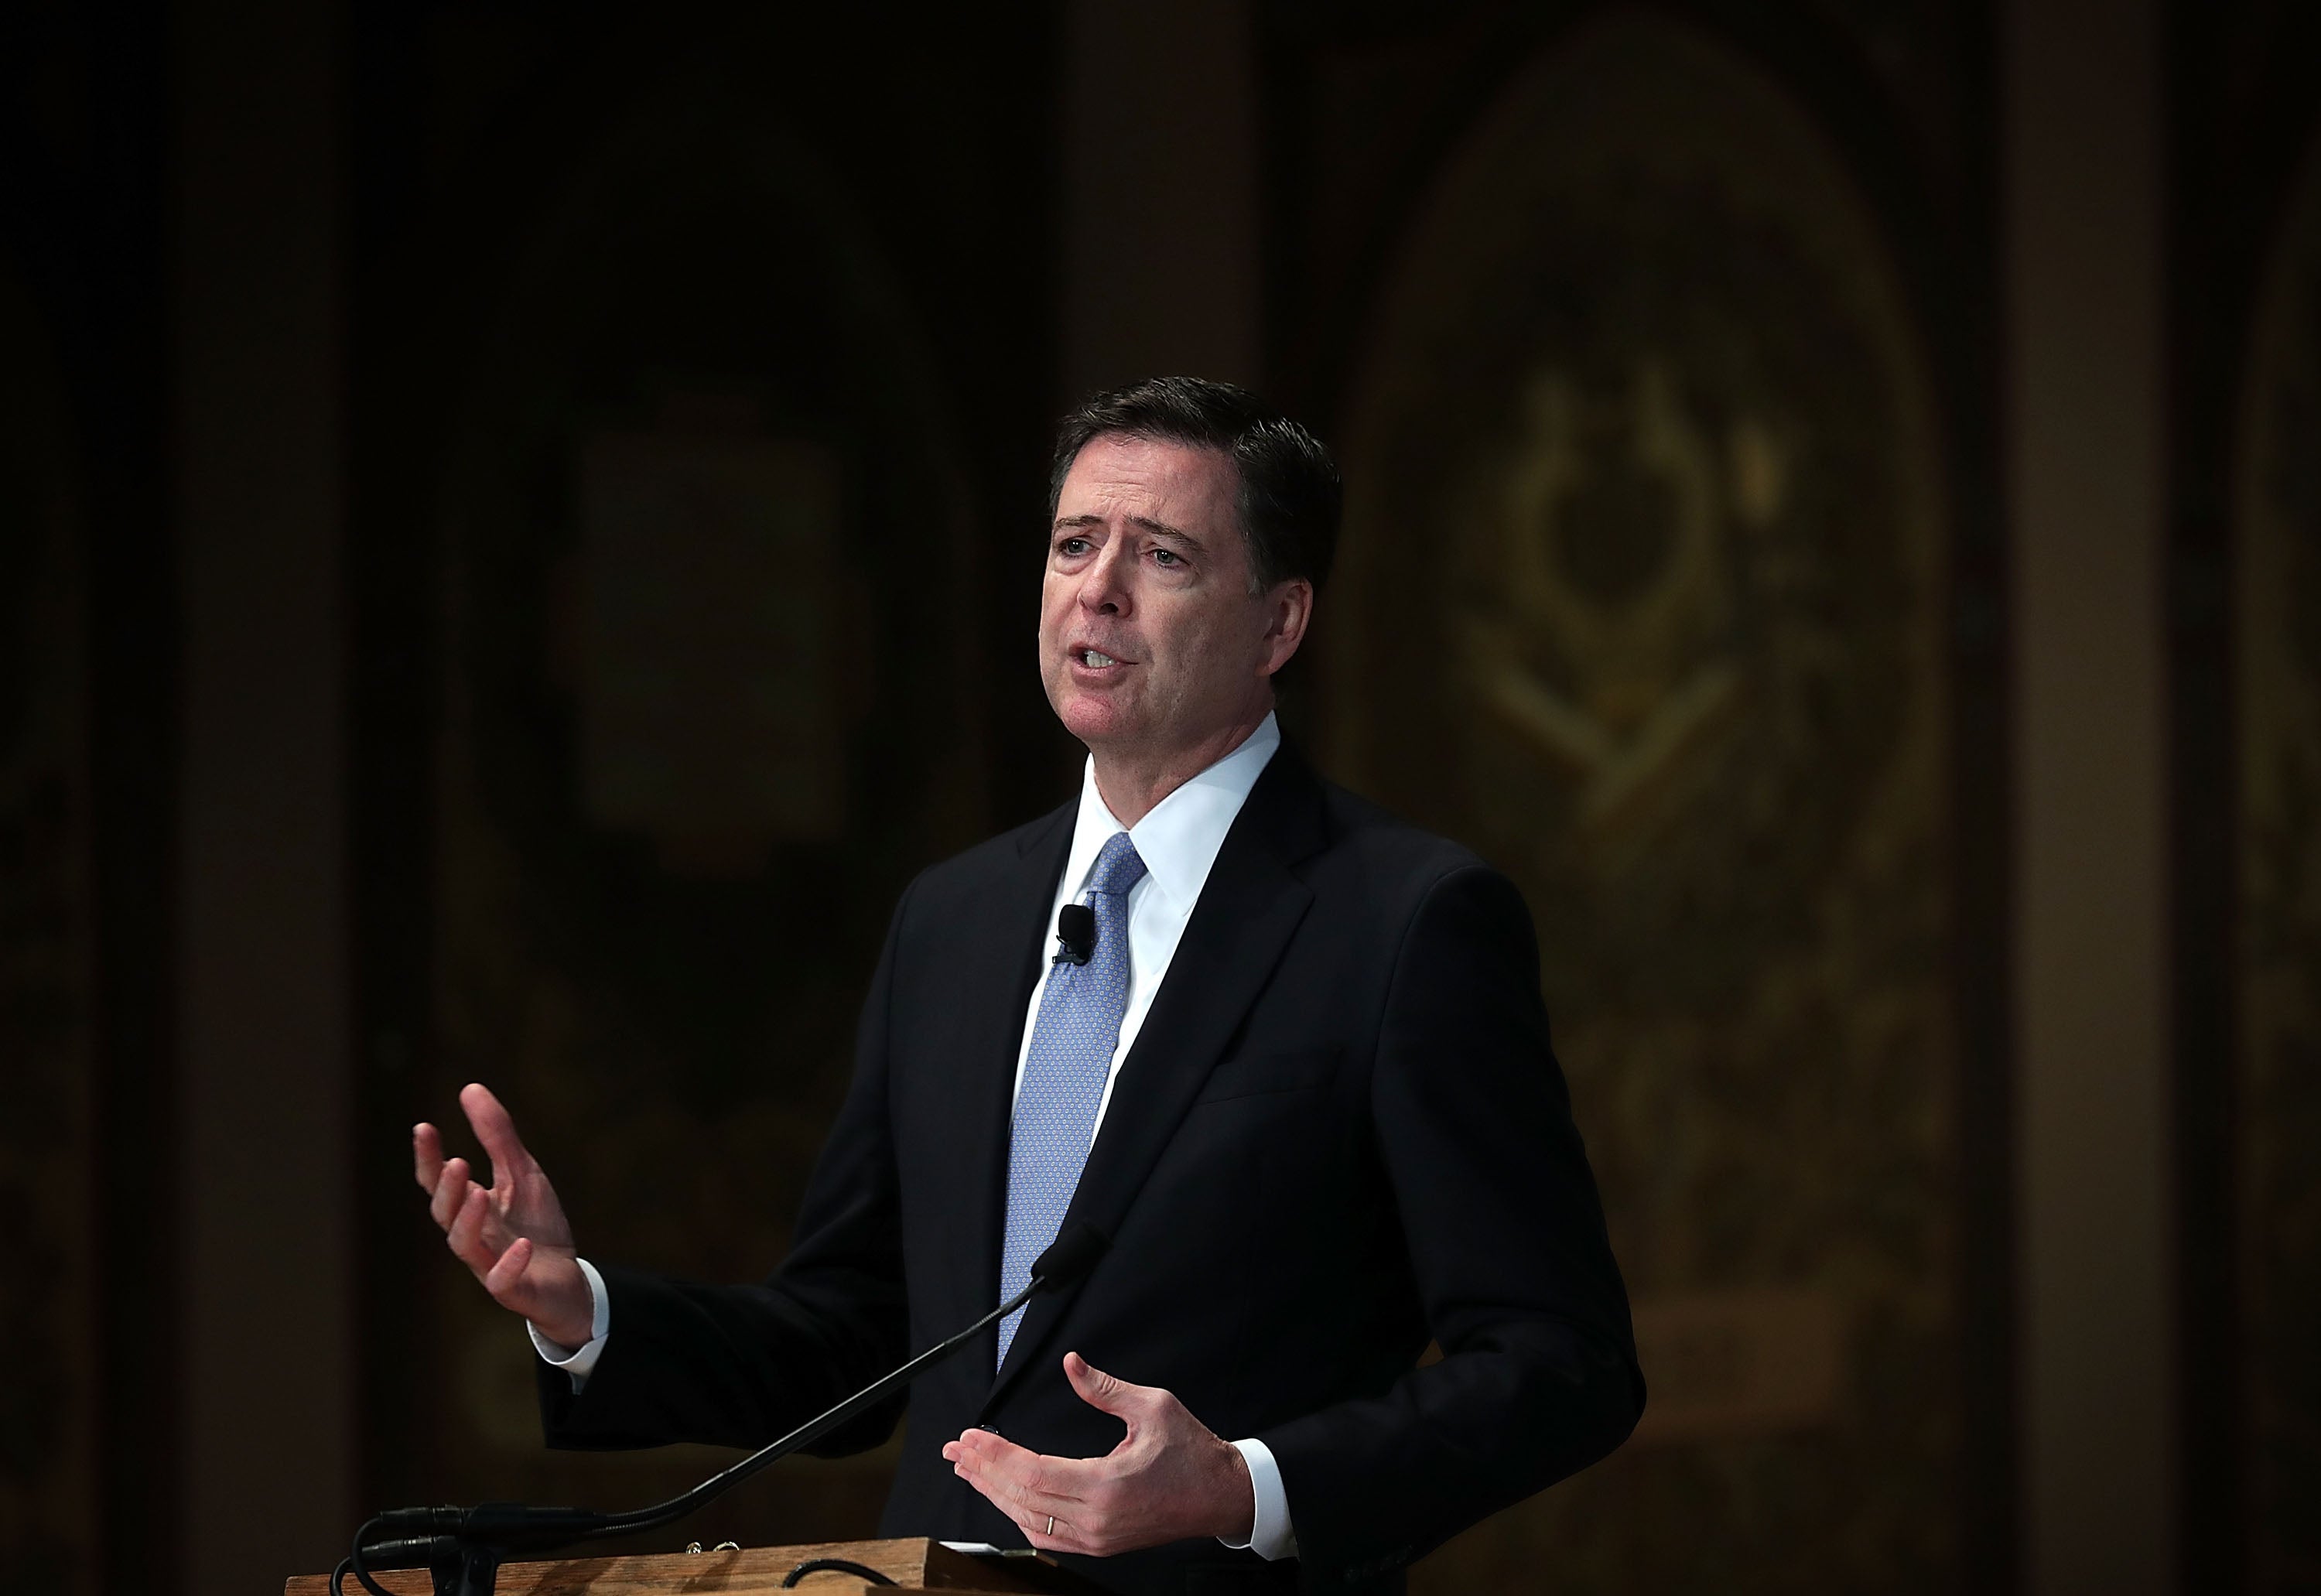 FBI Director James Comey Under Fire After Hillary Clinton Email Investigation Announcement
